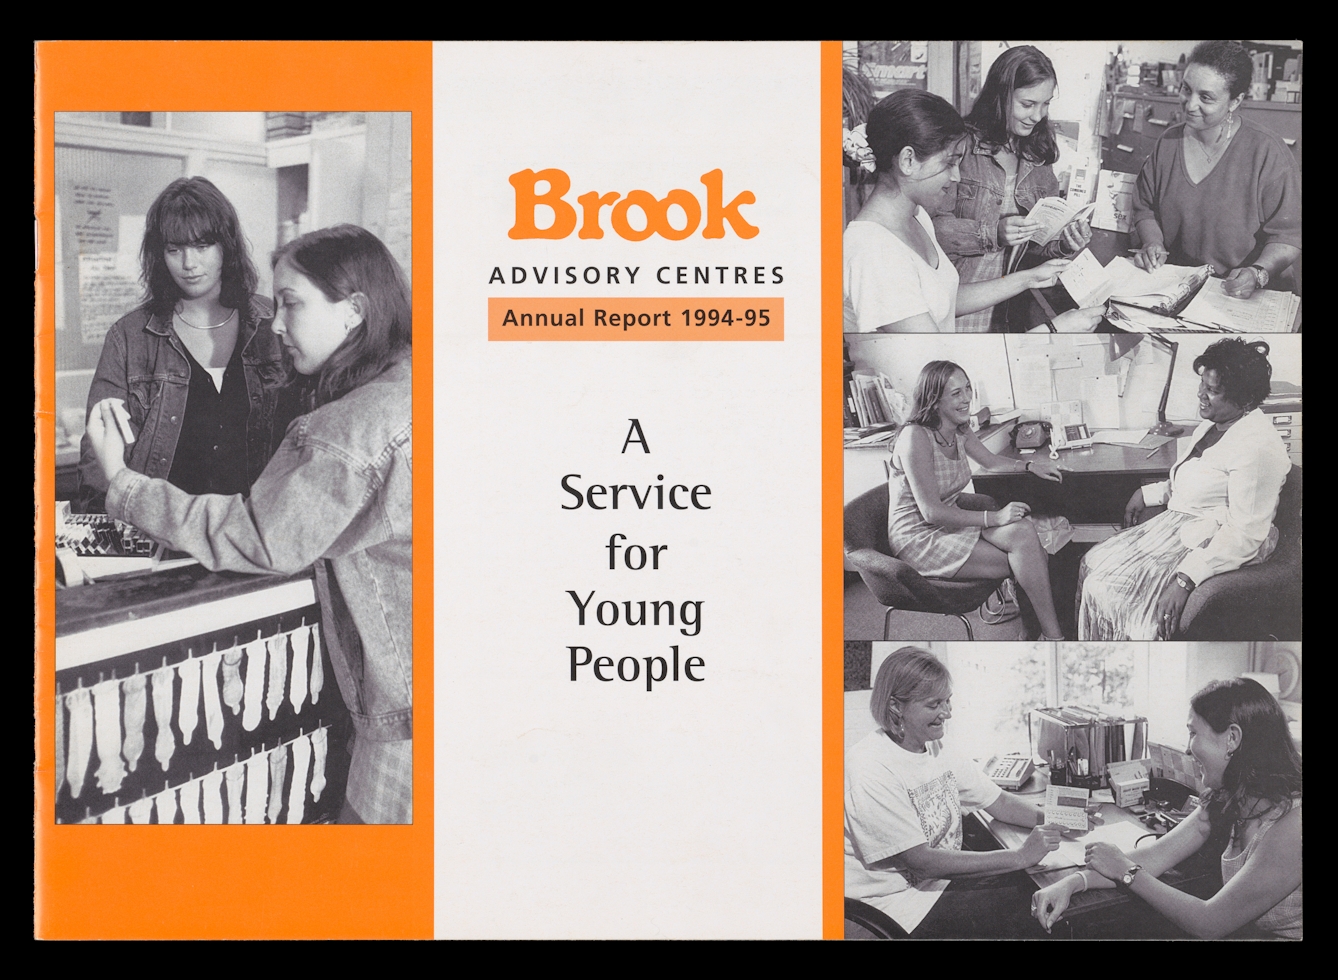 Photograph of archive material from the 1980s against a black background. The image shows an information leaflet which contains black and white photographs and orange graphical elements. The leaflet is split into three vertical panels. The one on the left shows a black and white photograph of two young woman in conversation over a counter. On the front of the counter is a large poster showing many different shaped condoms hanging on washing lines. The central panel contains the words 'Book Advisory Centres. Annual Report 1994-95. A Service for Young people'. The panel on the right show three photographs one above the other, each one shows a group on women in discussion.